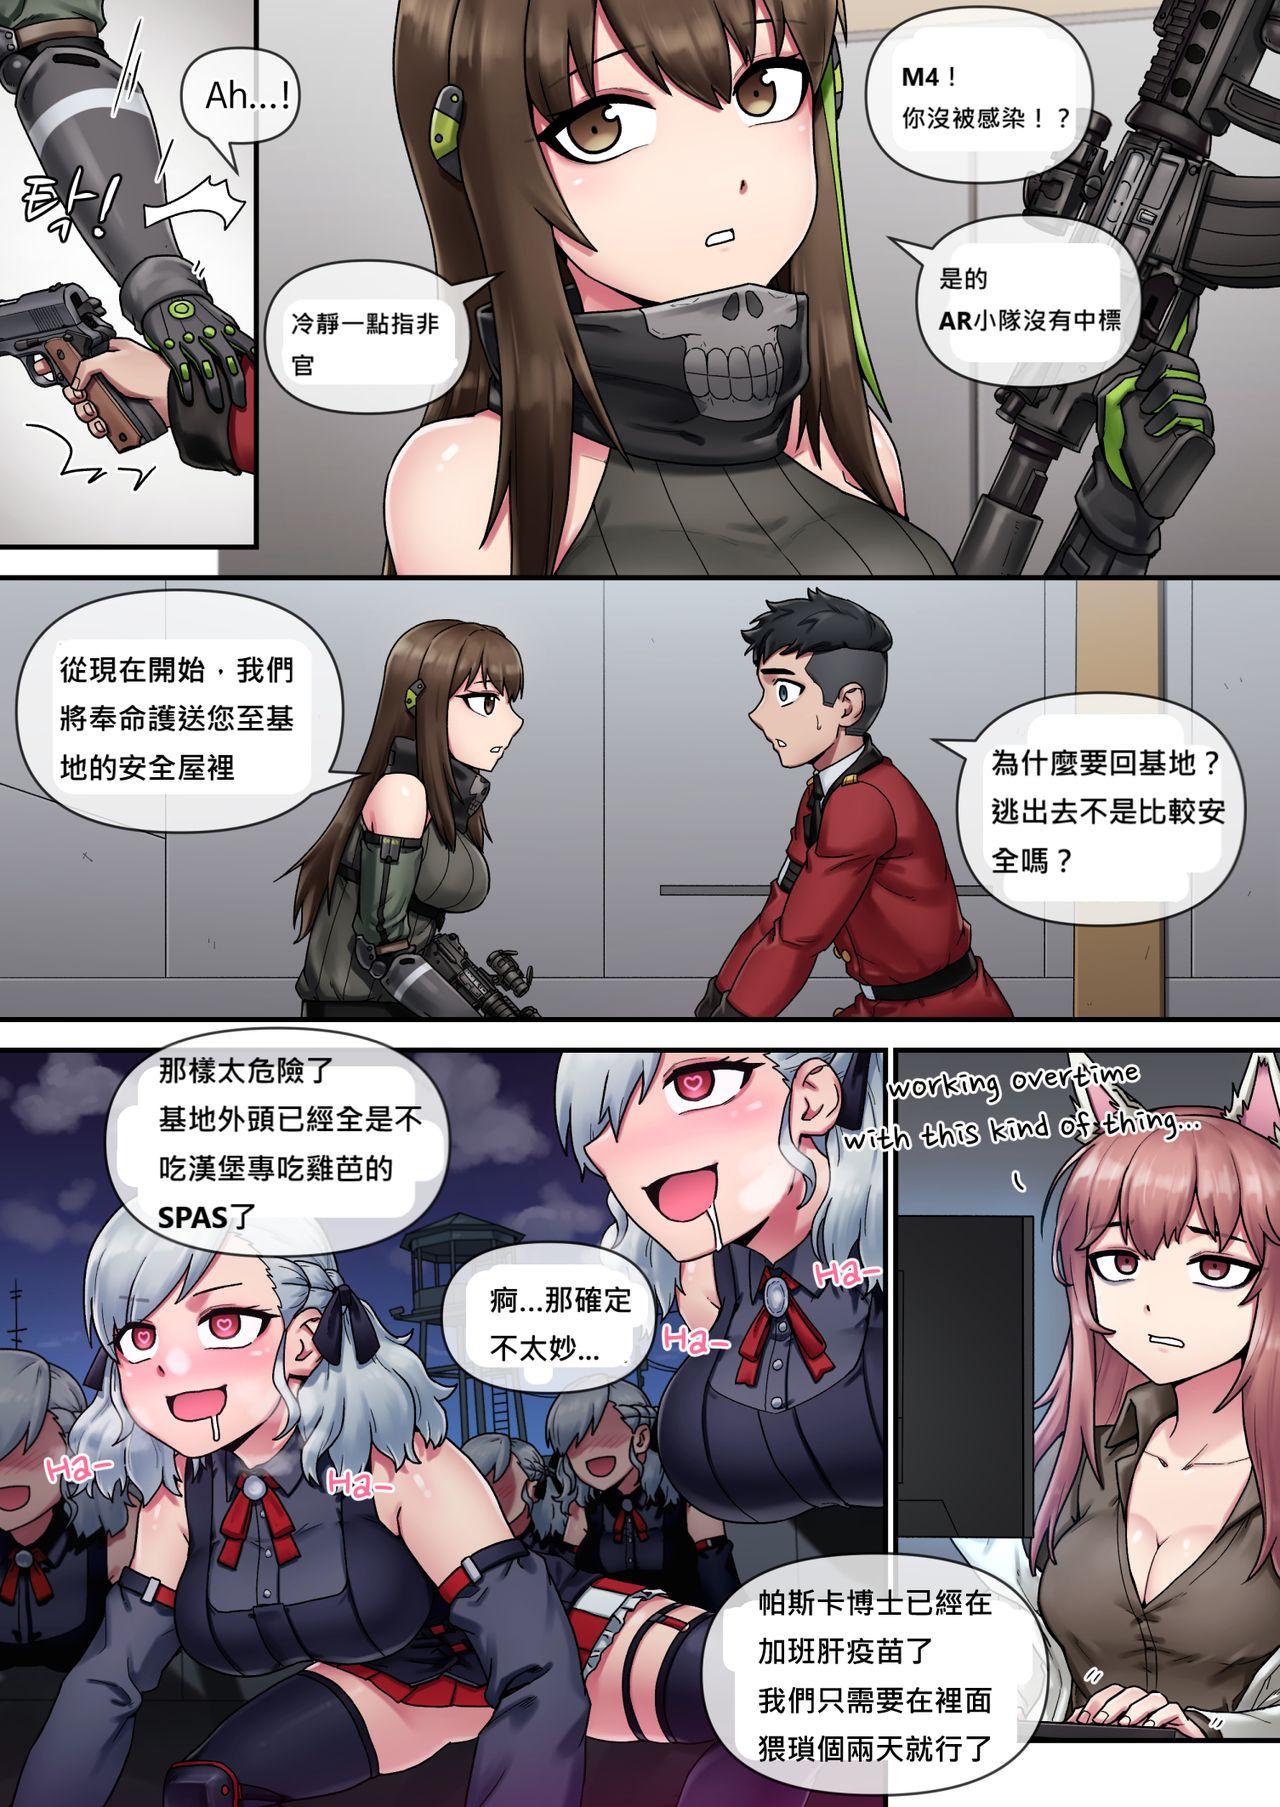 Lez Fuck My Only Princess - Girls frontline Africa - Page 4